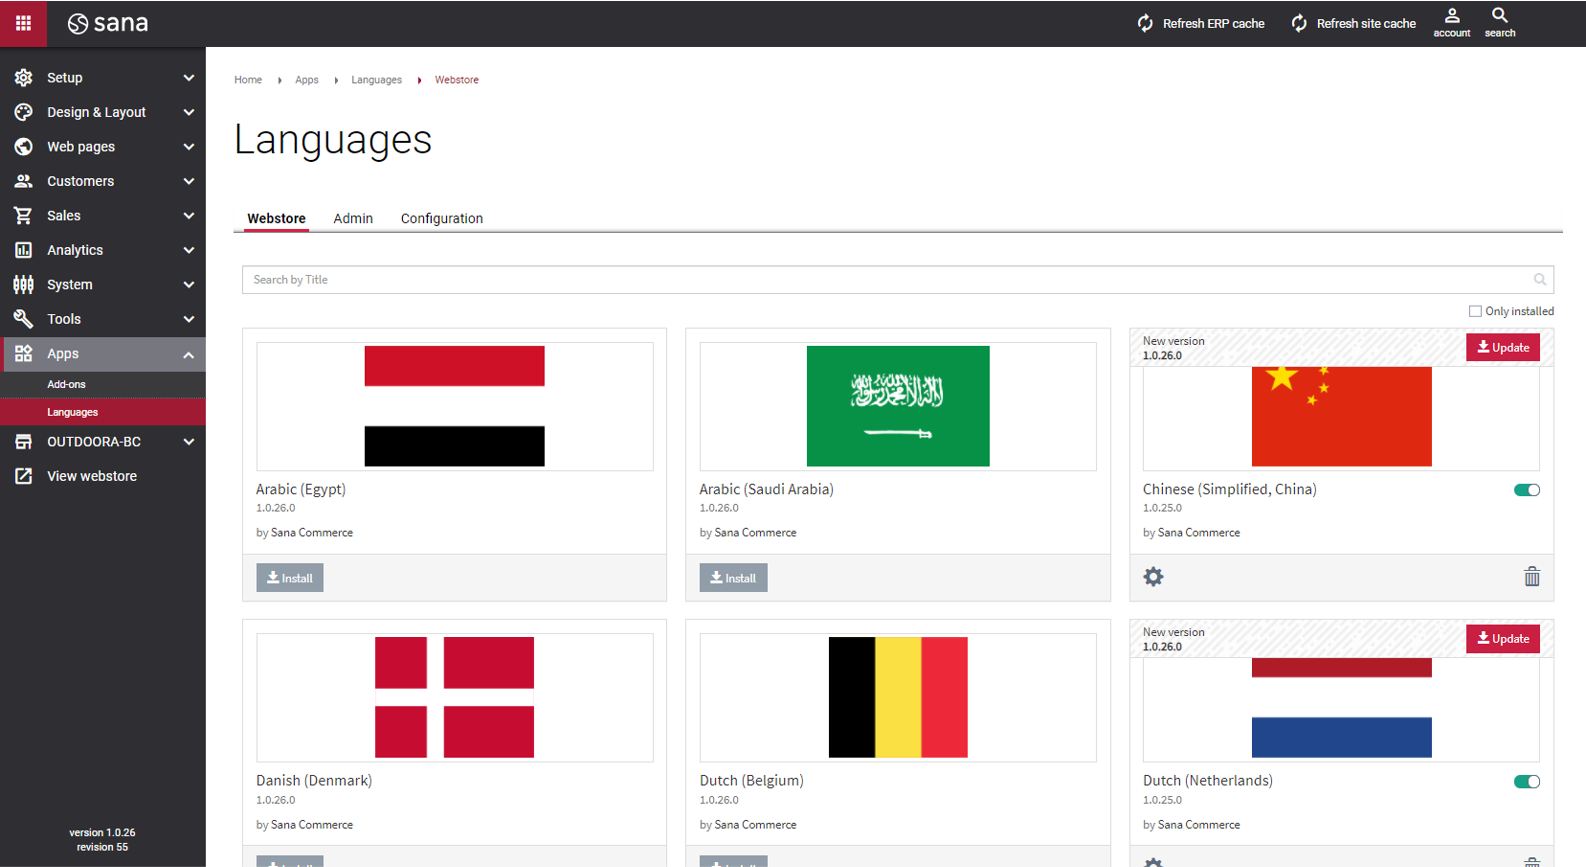 Translate your store into multiple languages with our out-of-the-box language packs. You can also select specific pages to translate based on product availability in certain countries or regions.